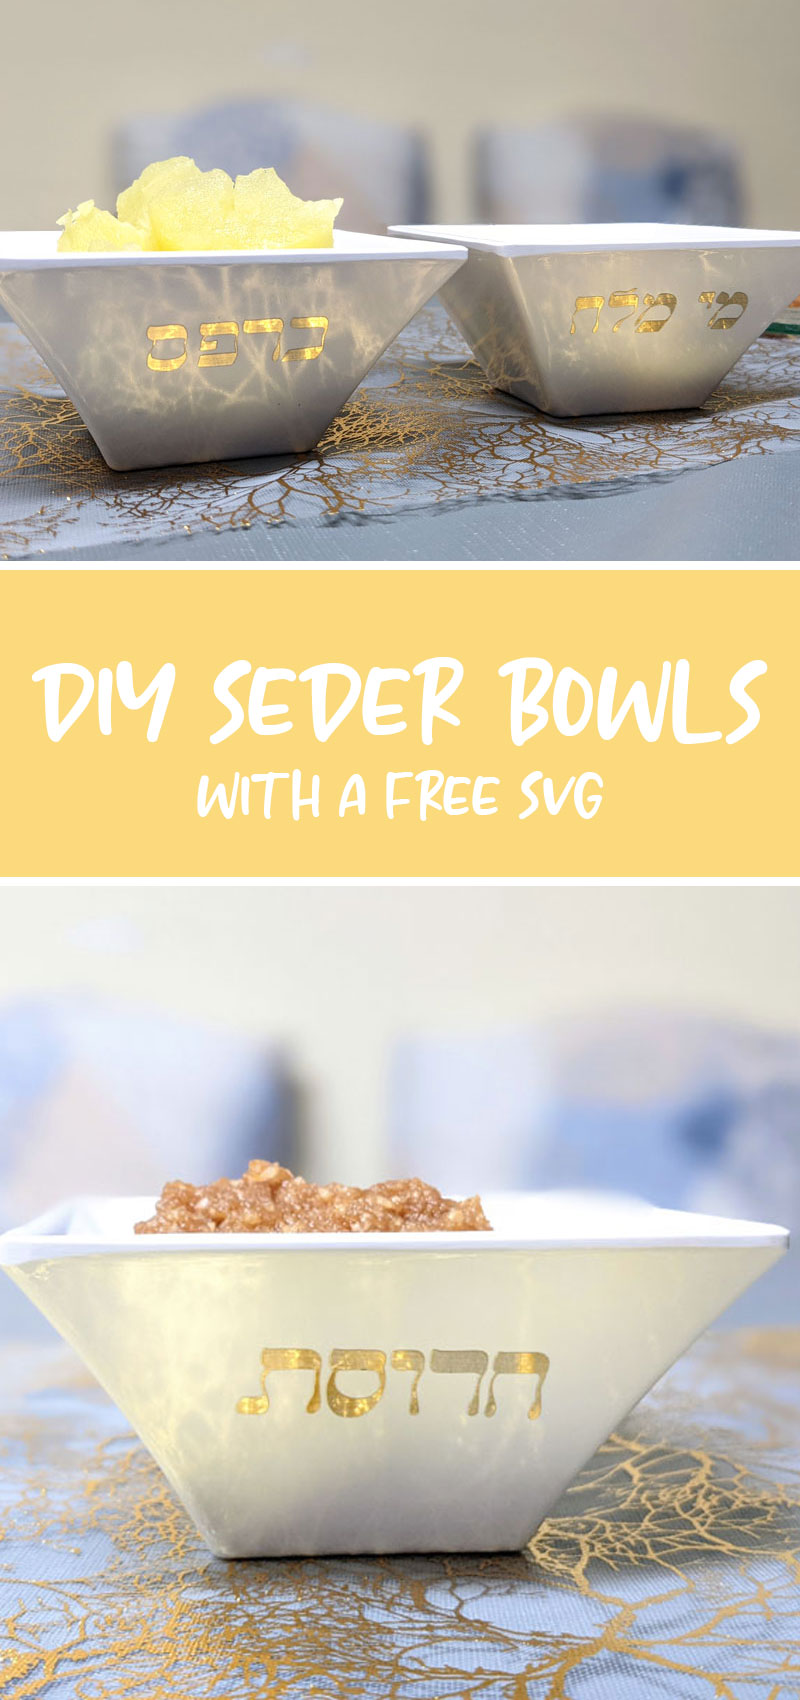 seder bowls with free svg